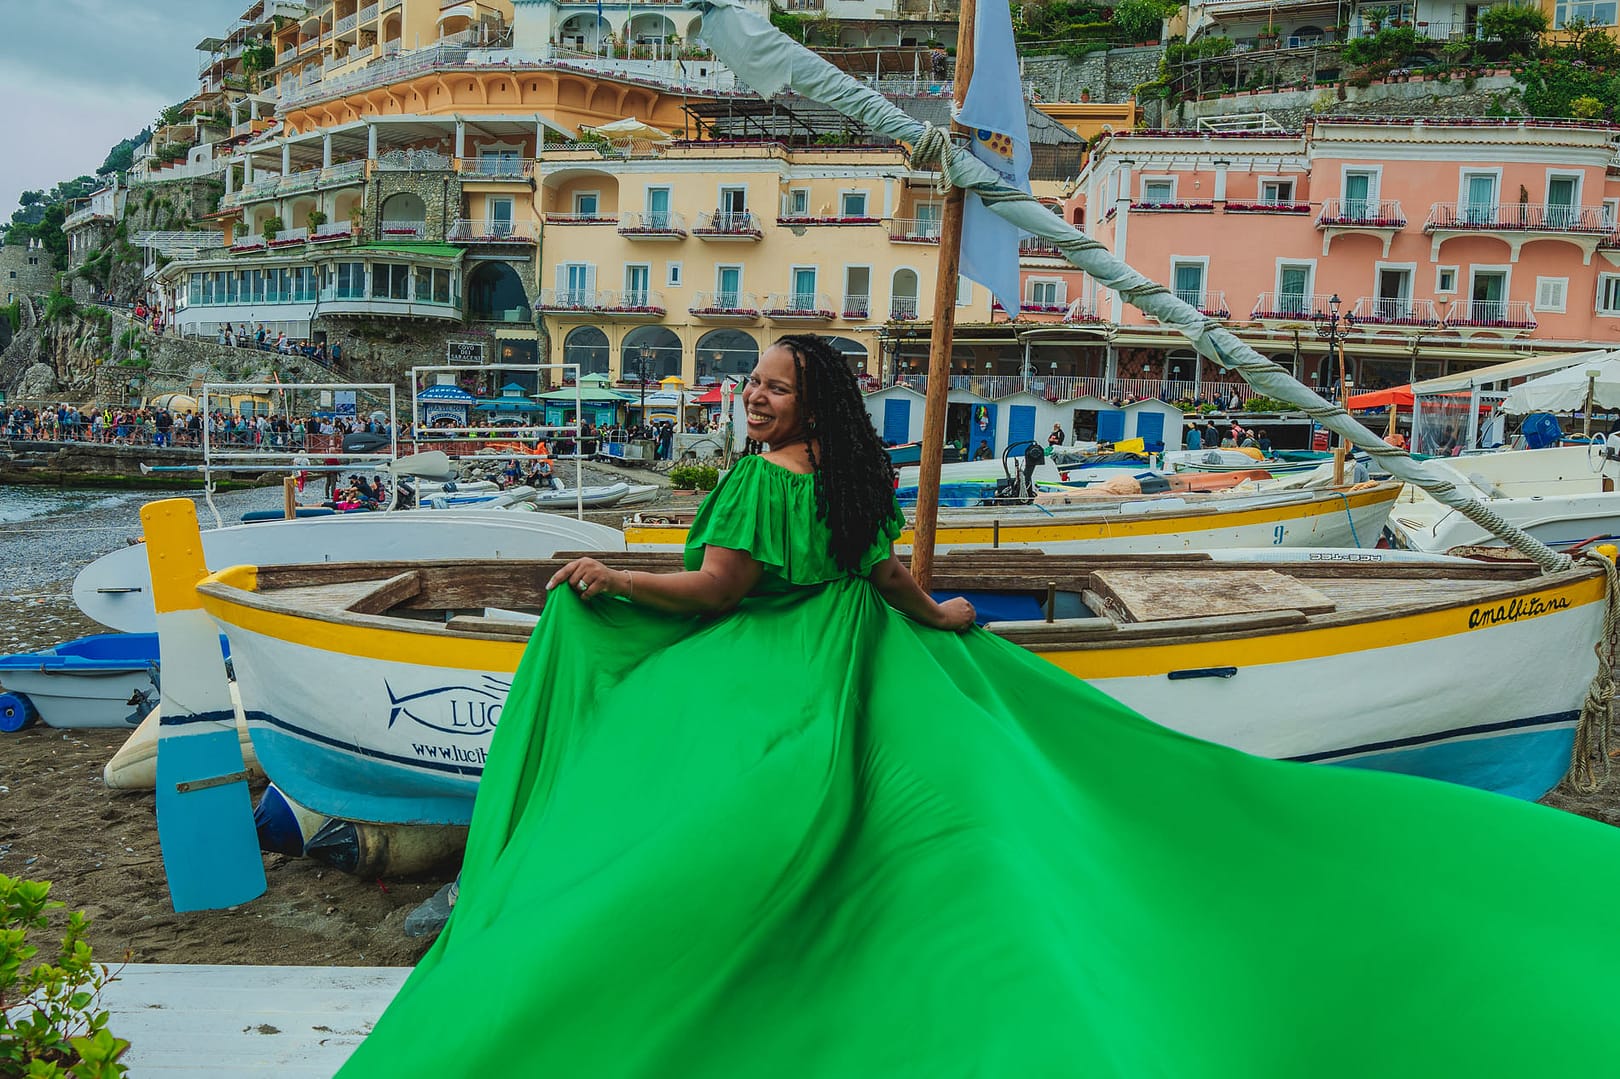 A woman on holiday in green dress at the Amalfi coast